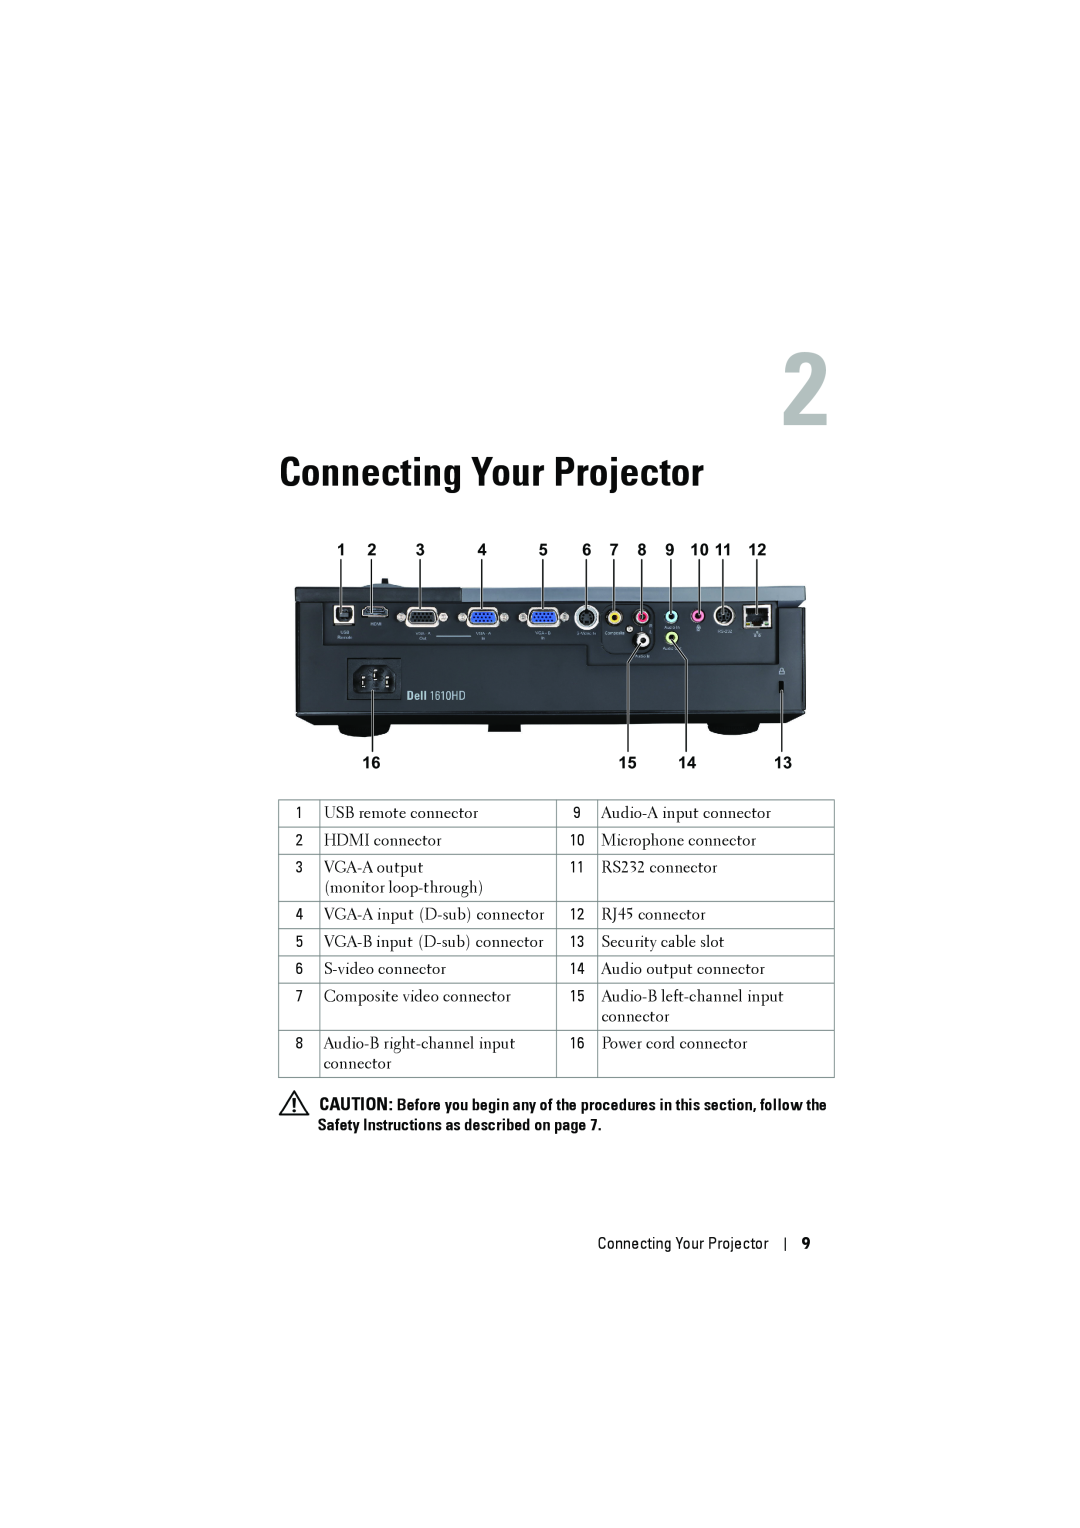 Dell 1610HD manual Connecting Your Projector 